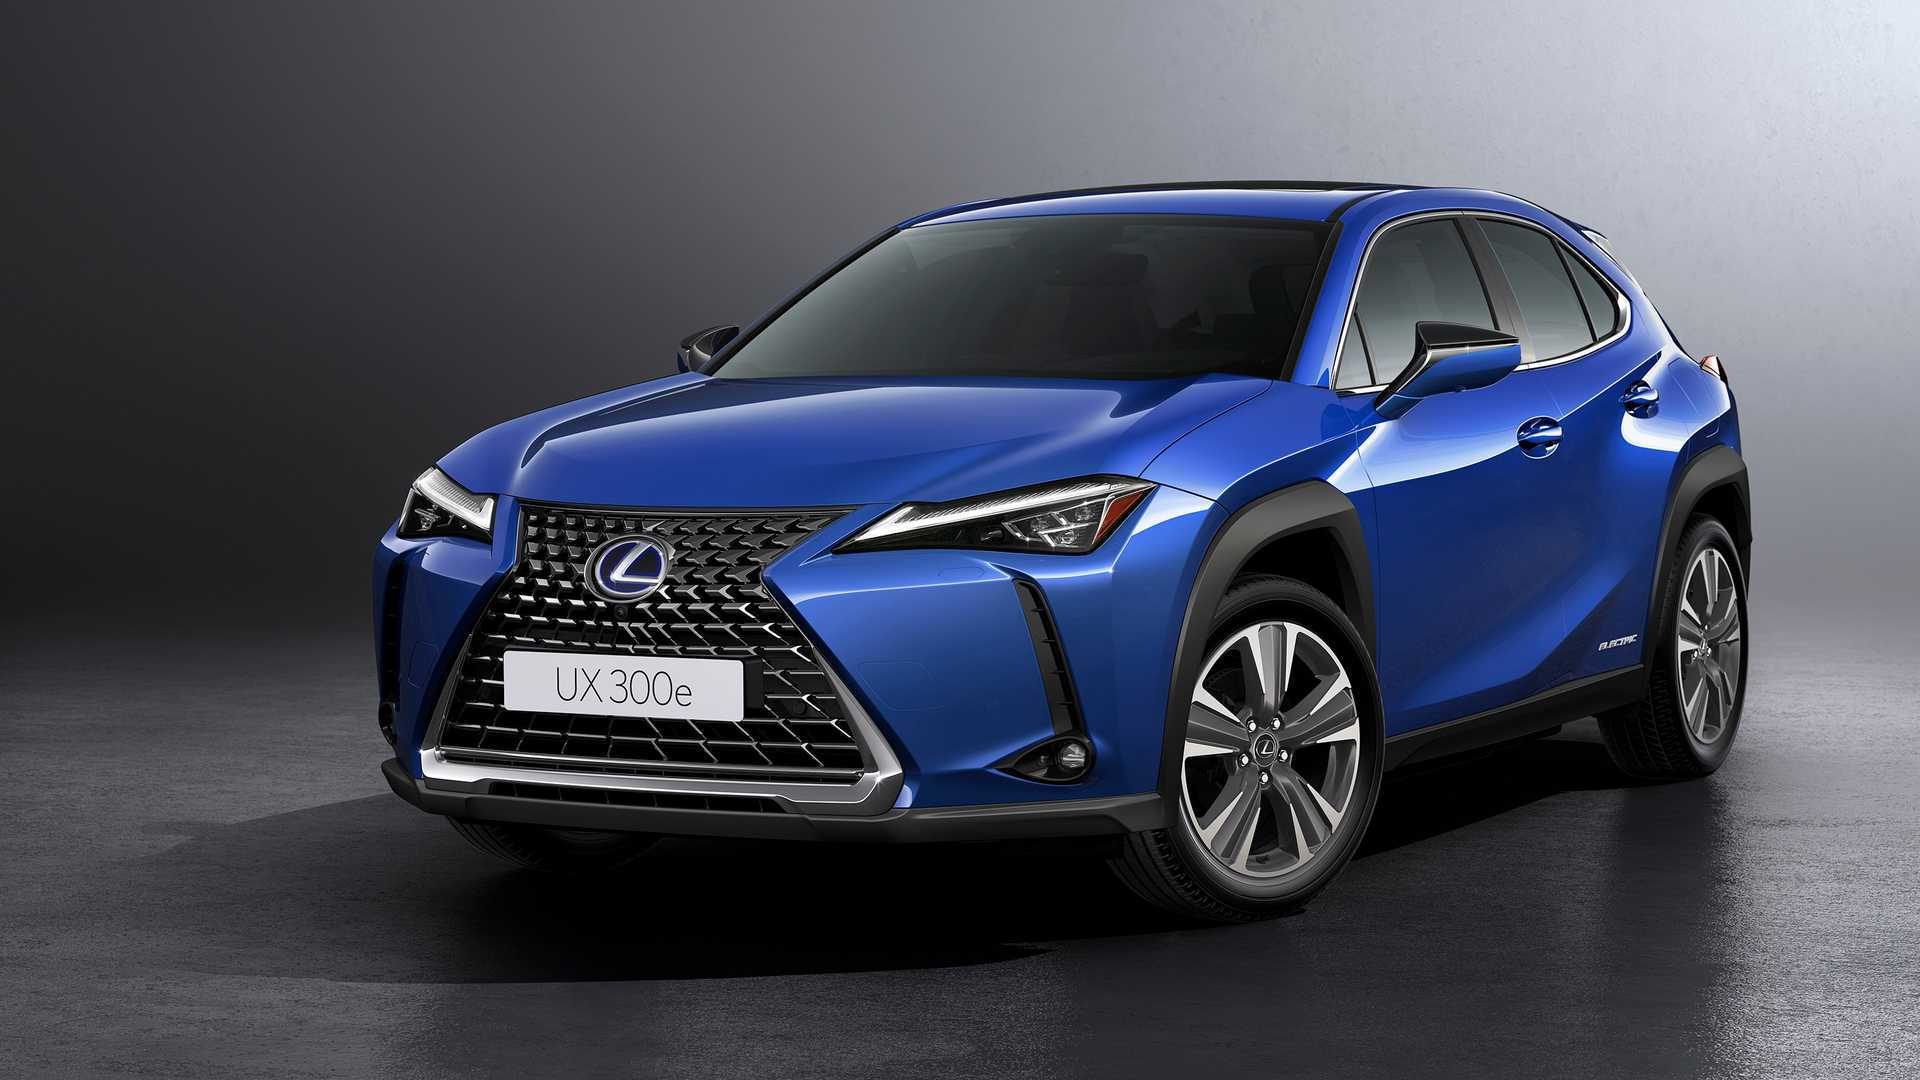 First production EV from Lexus is the UX 300e compact crossover